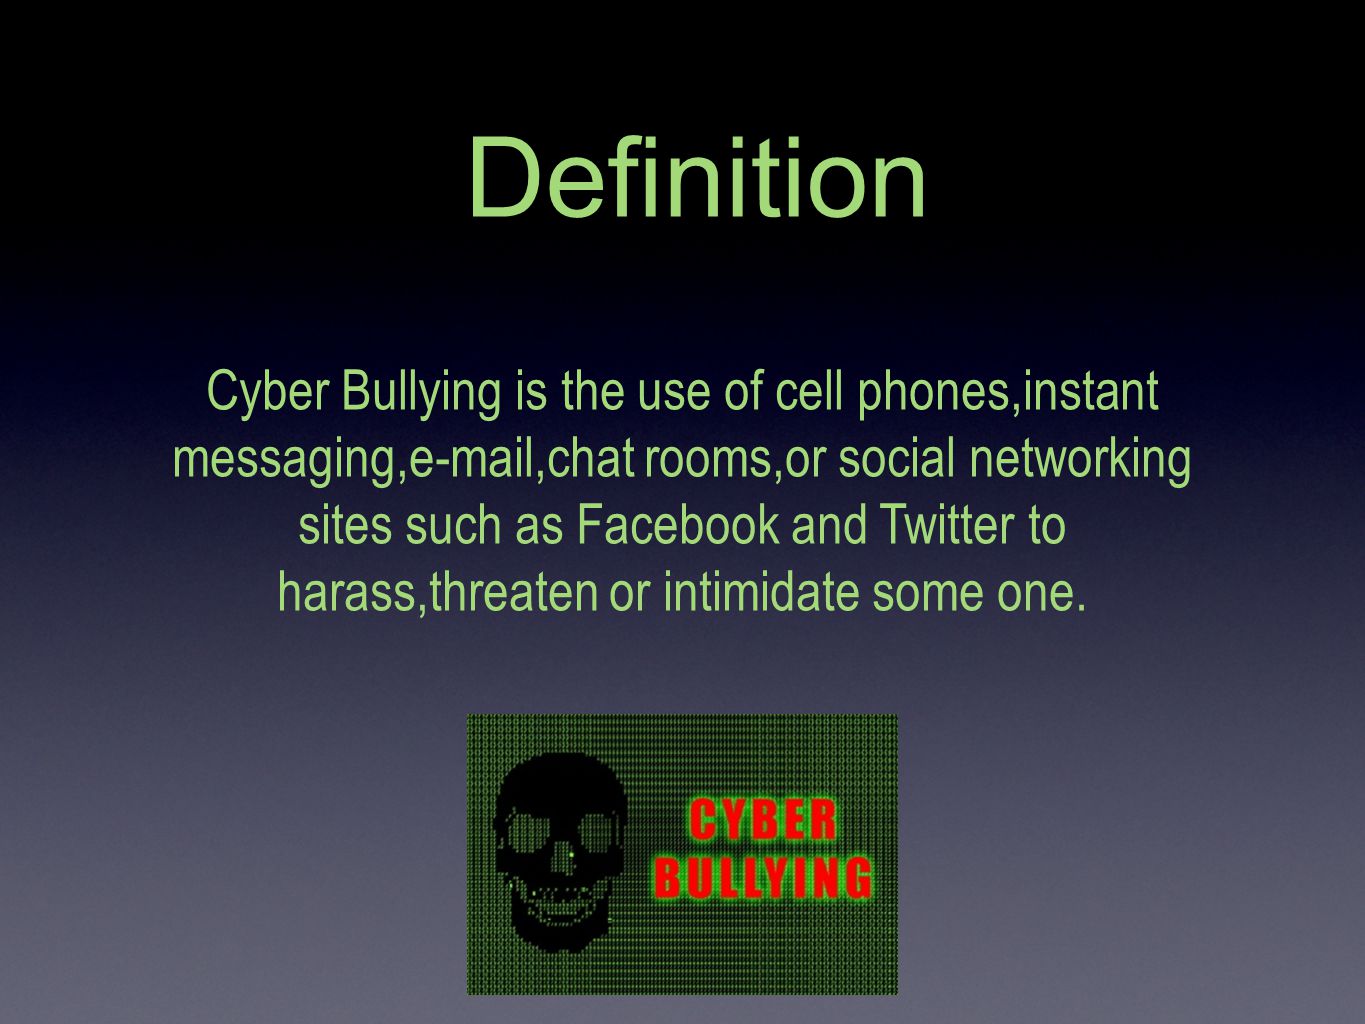 Definition Cyber Bullying is the use of cell phones,instant messaging, ,chat rooms,or social networking sites such as Facebook and Twitter to harass,threaten or intimidate some one.